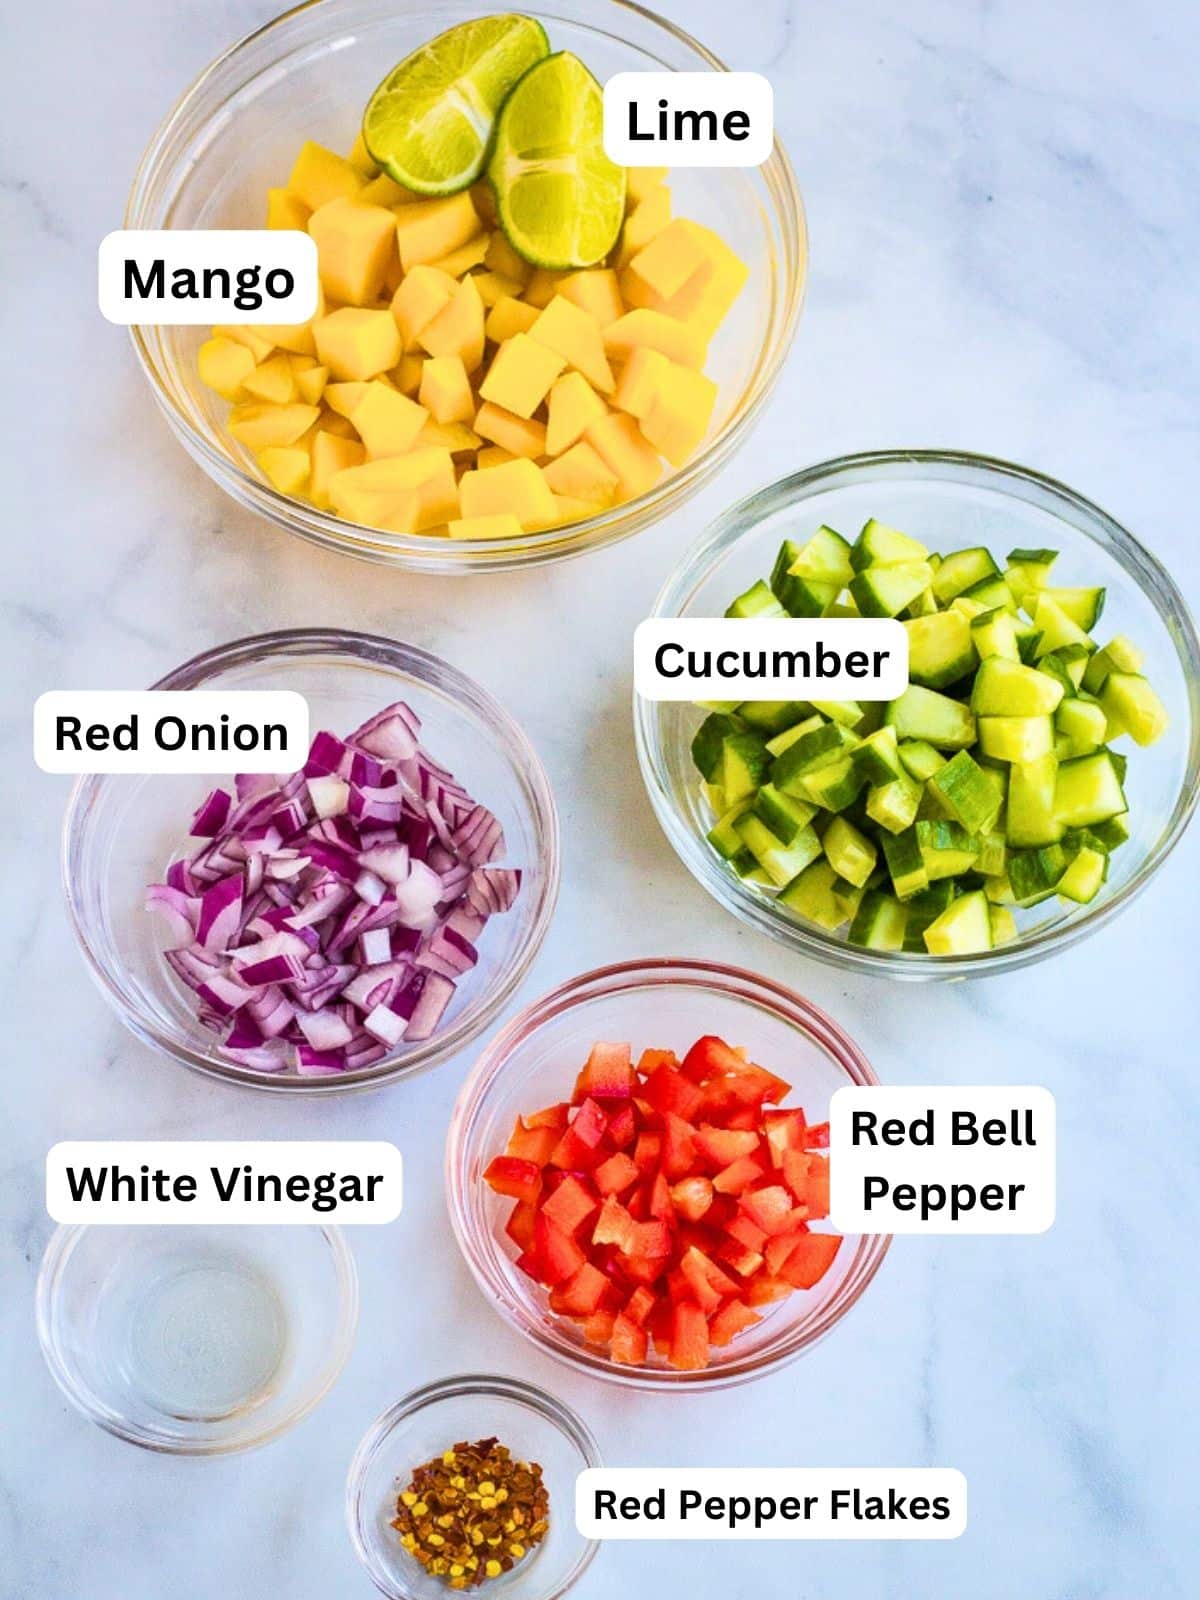 Mango salad ingredients: diced mango, lime, diced red onion, diced cucumber, diced red pepper, white vinegar, red pepper flakes.